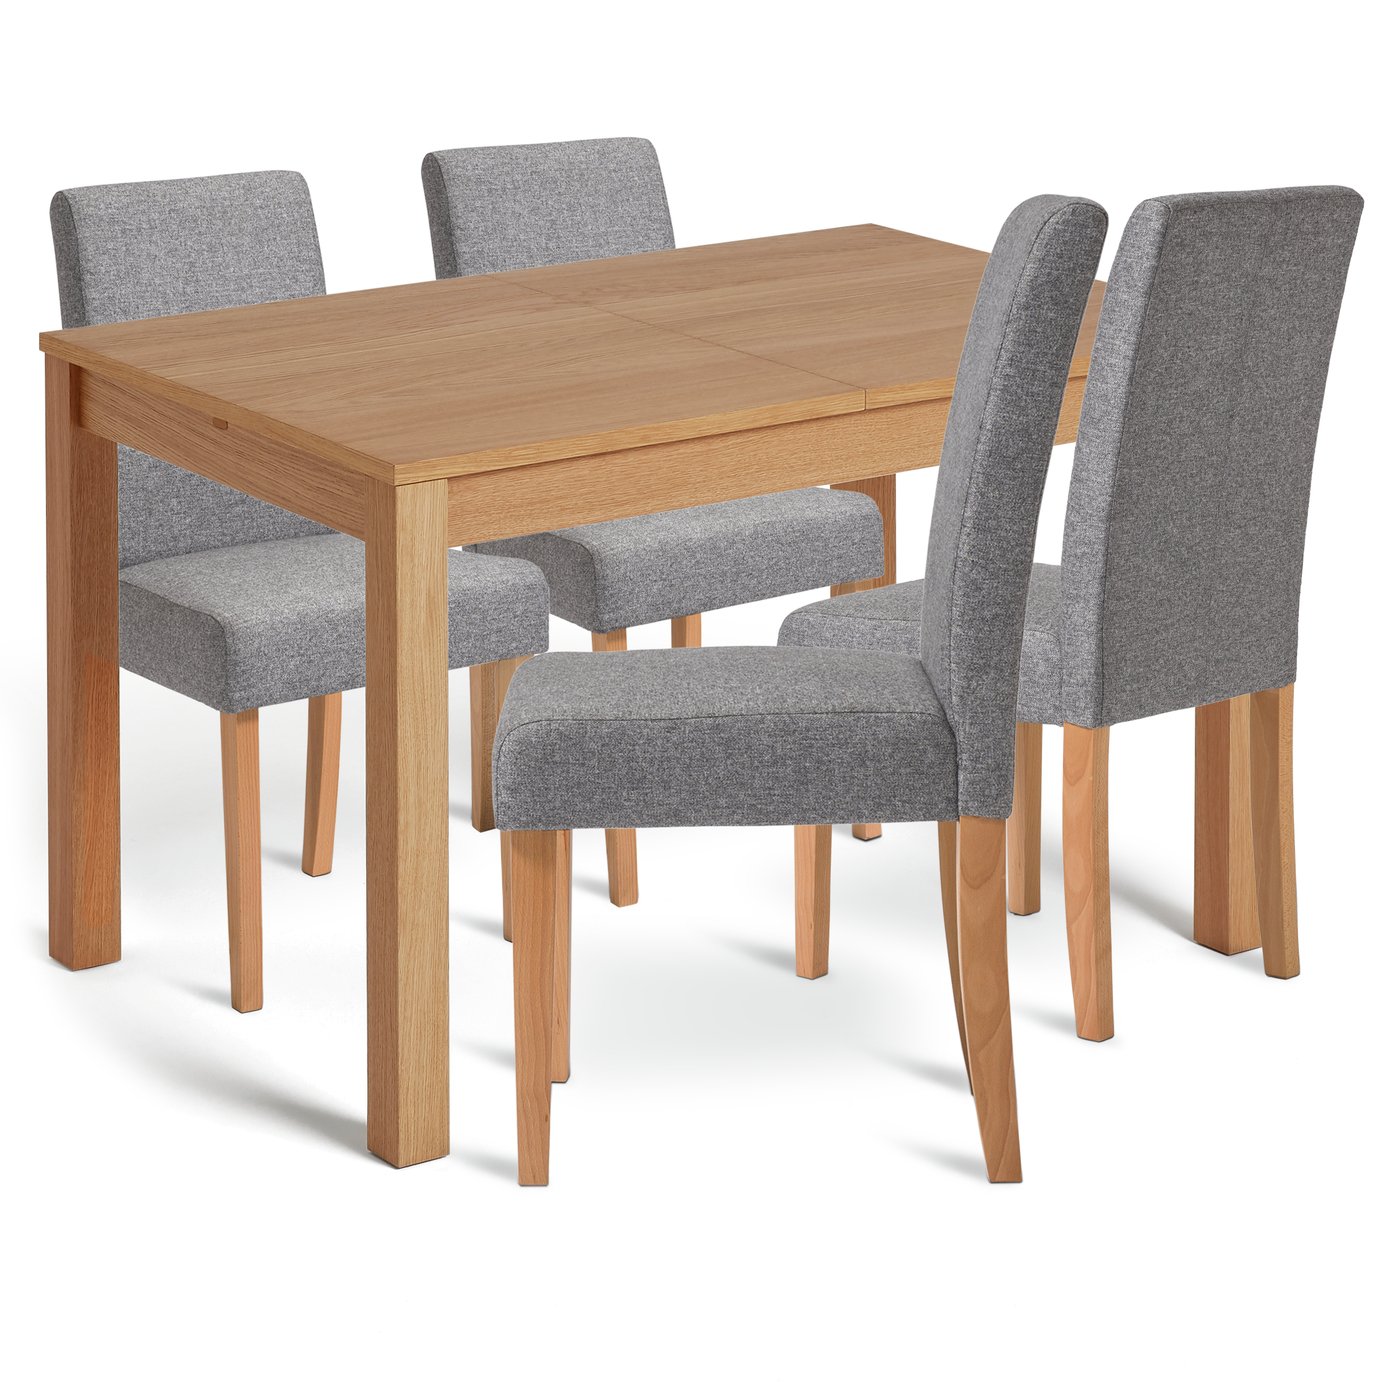 Habitat Clifton Wood Extending Dining Table & 4 Grey Chairs